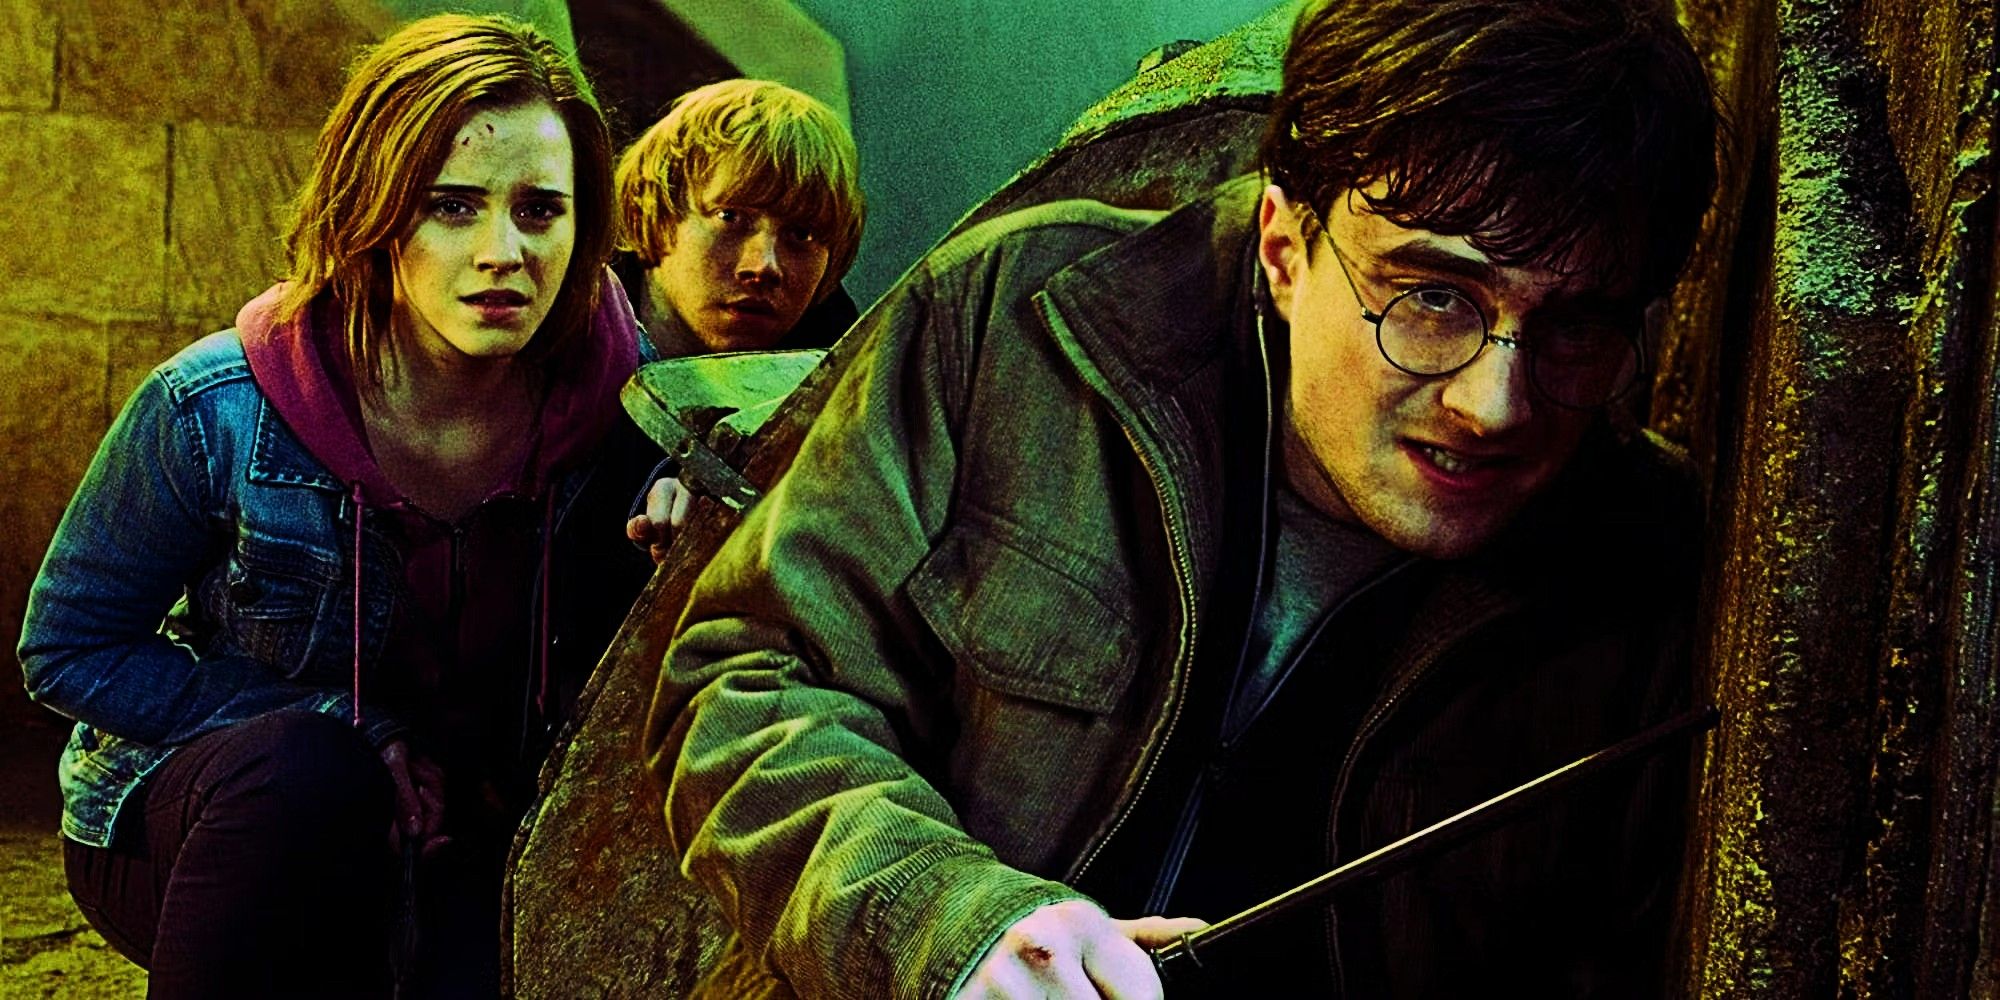 Daniel Radcliffe, Rupert Grint, and Emma Watson as Harry, Ron, and Hermione crouching on the ground during the Battle of Hogwarts in Harry Potter. 